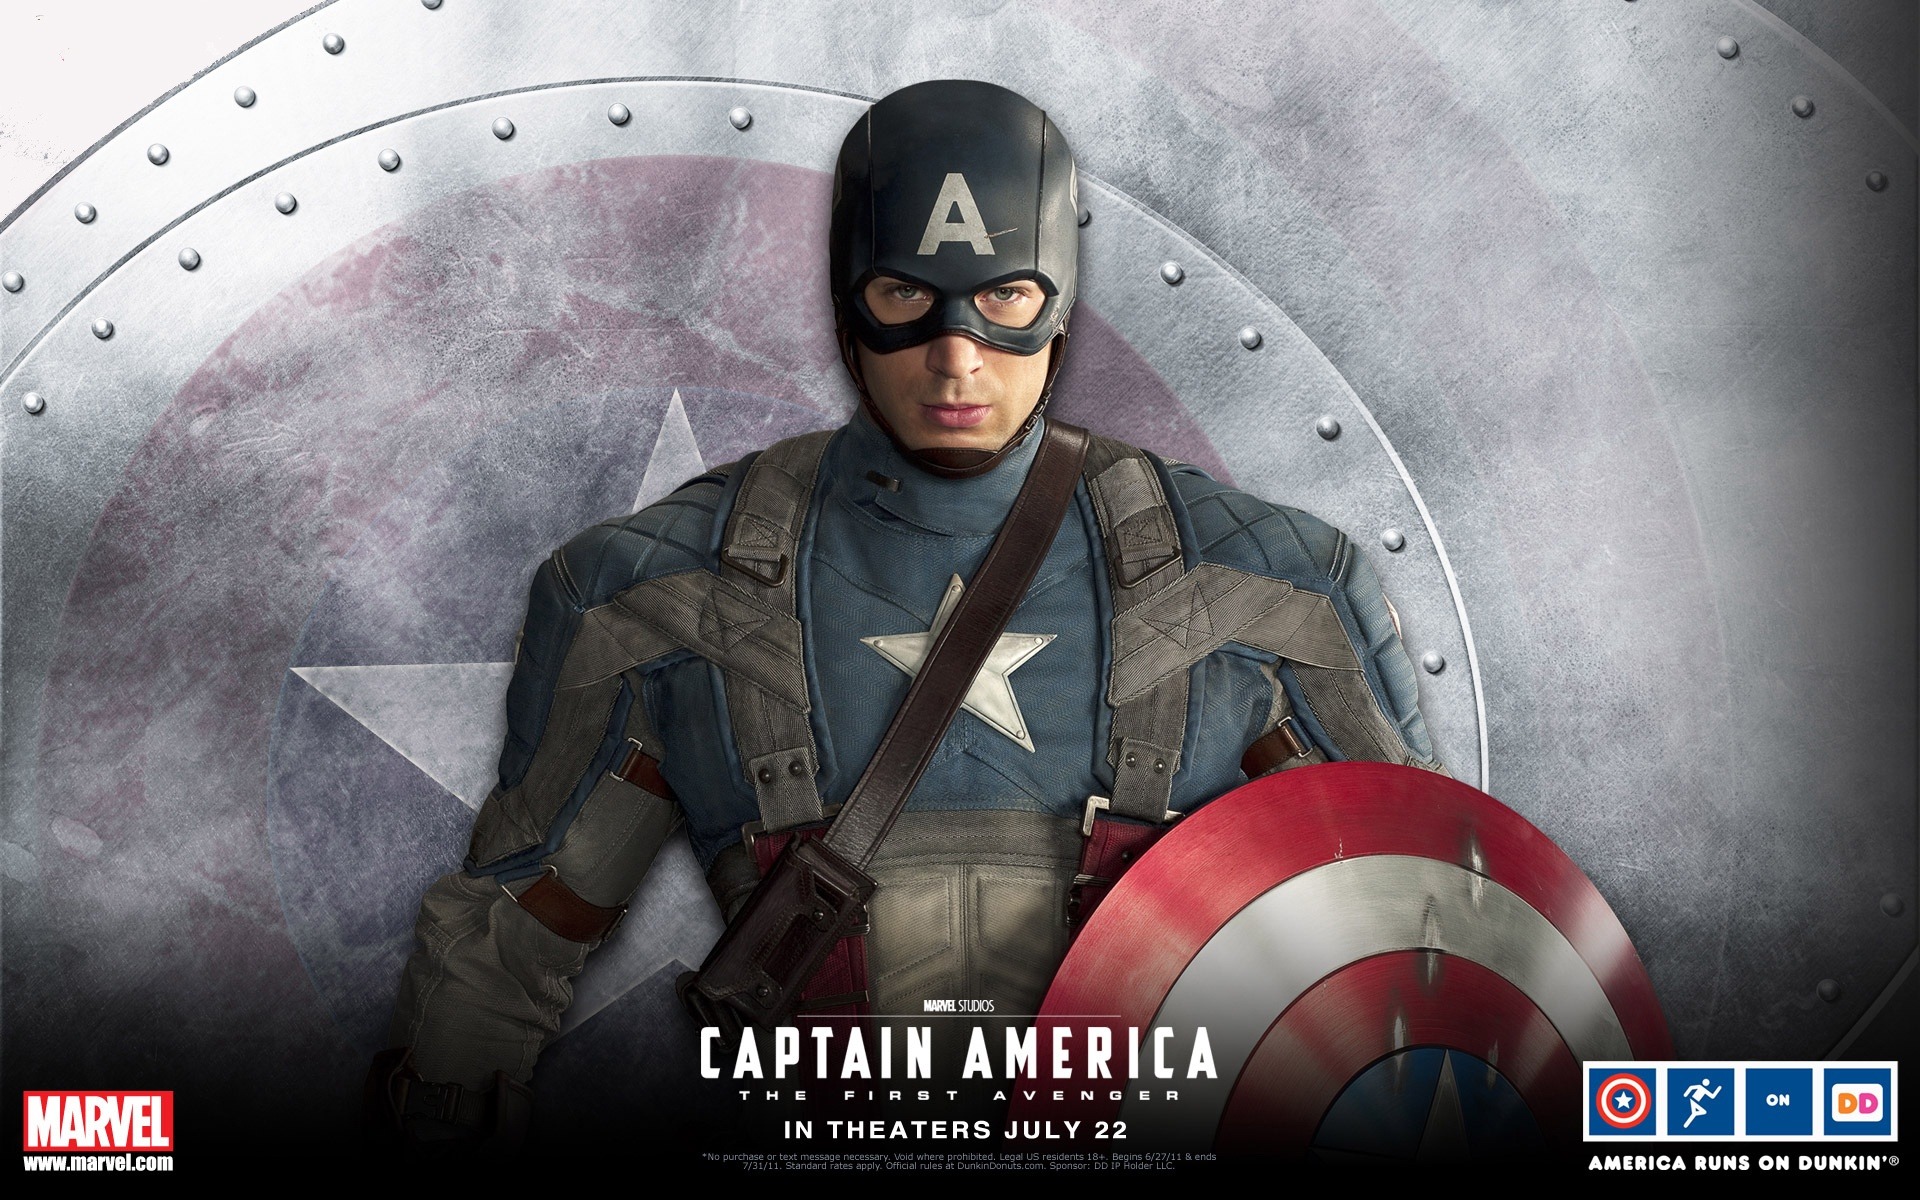 Captain America: The First Avenger wallpapers HD #4 - 1920x1200